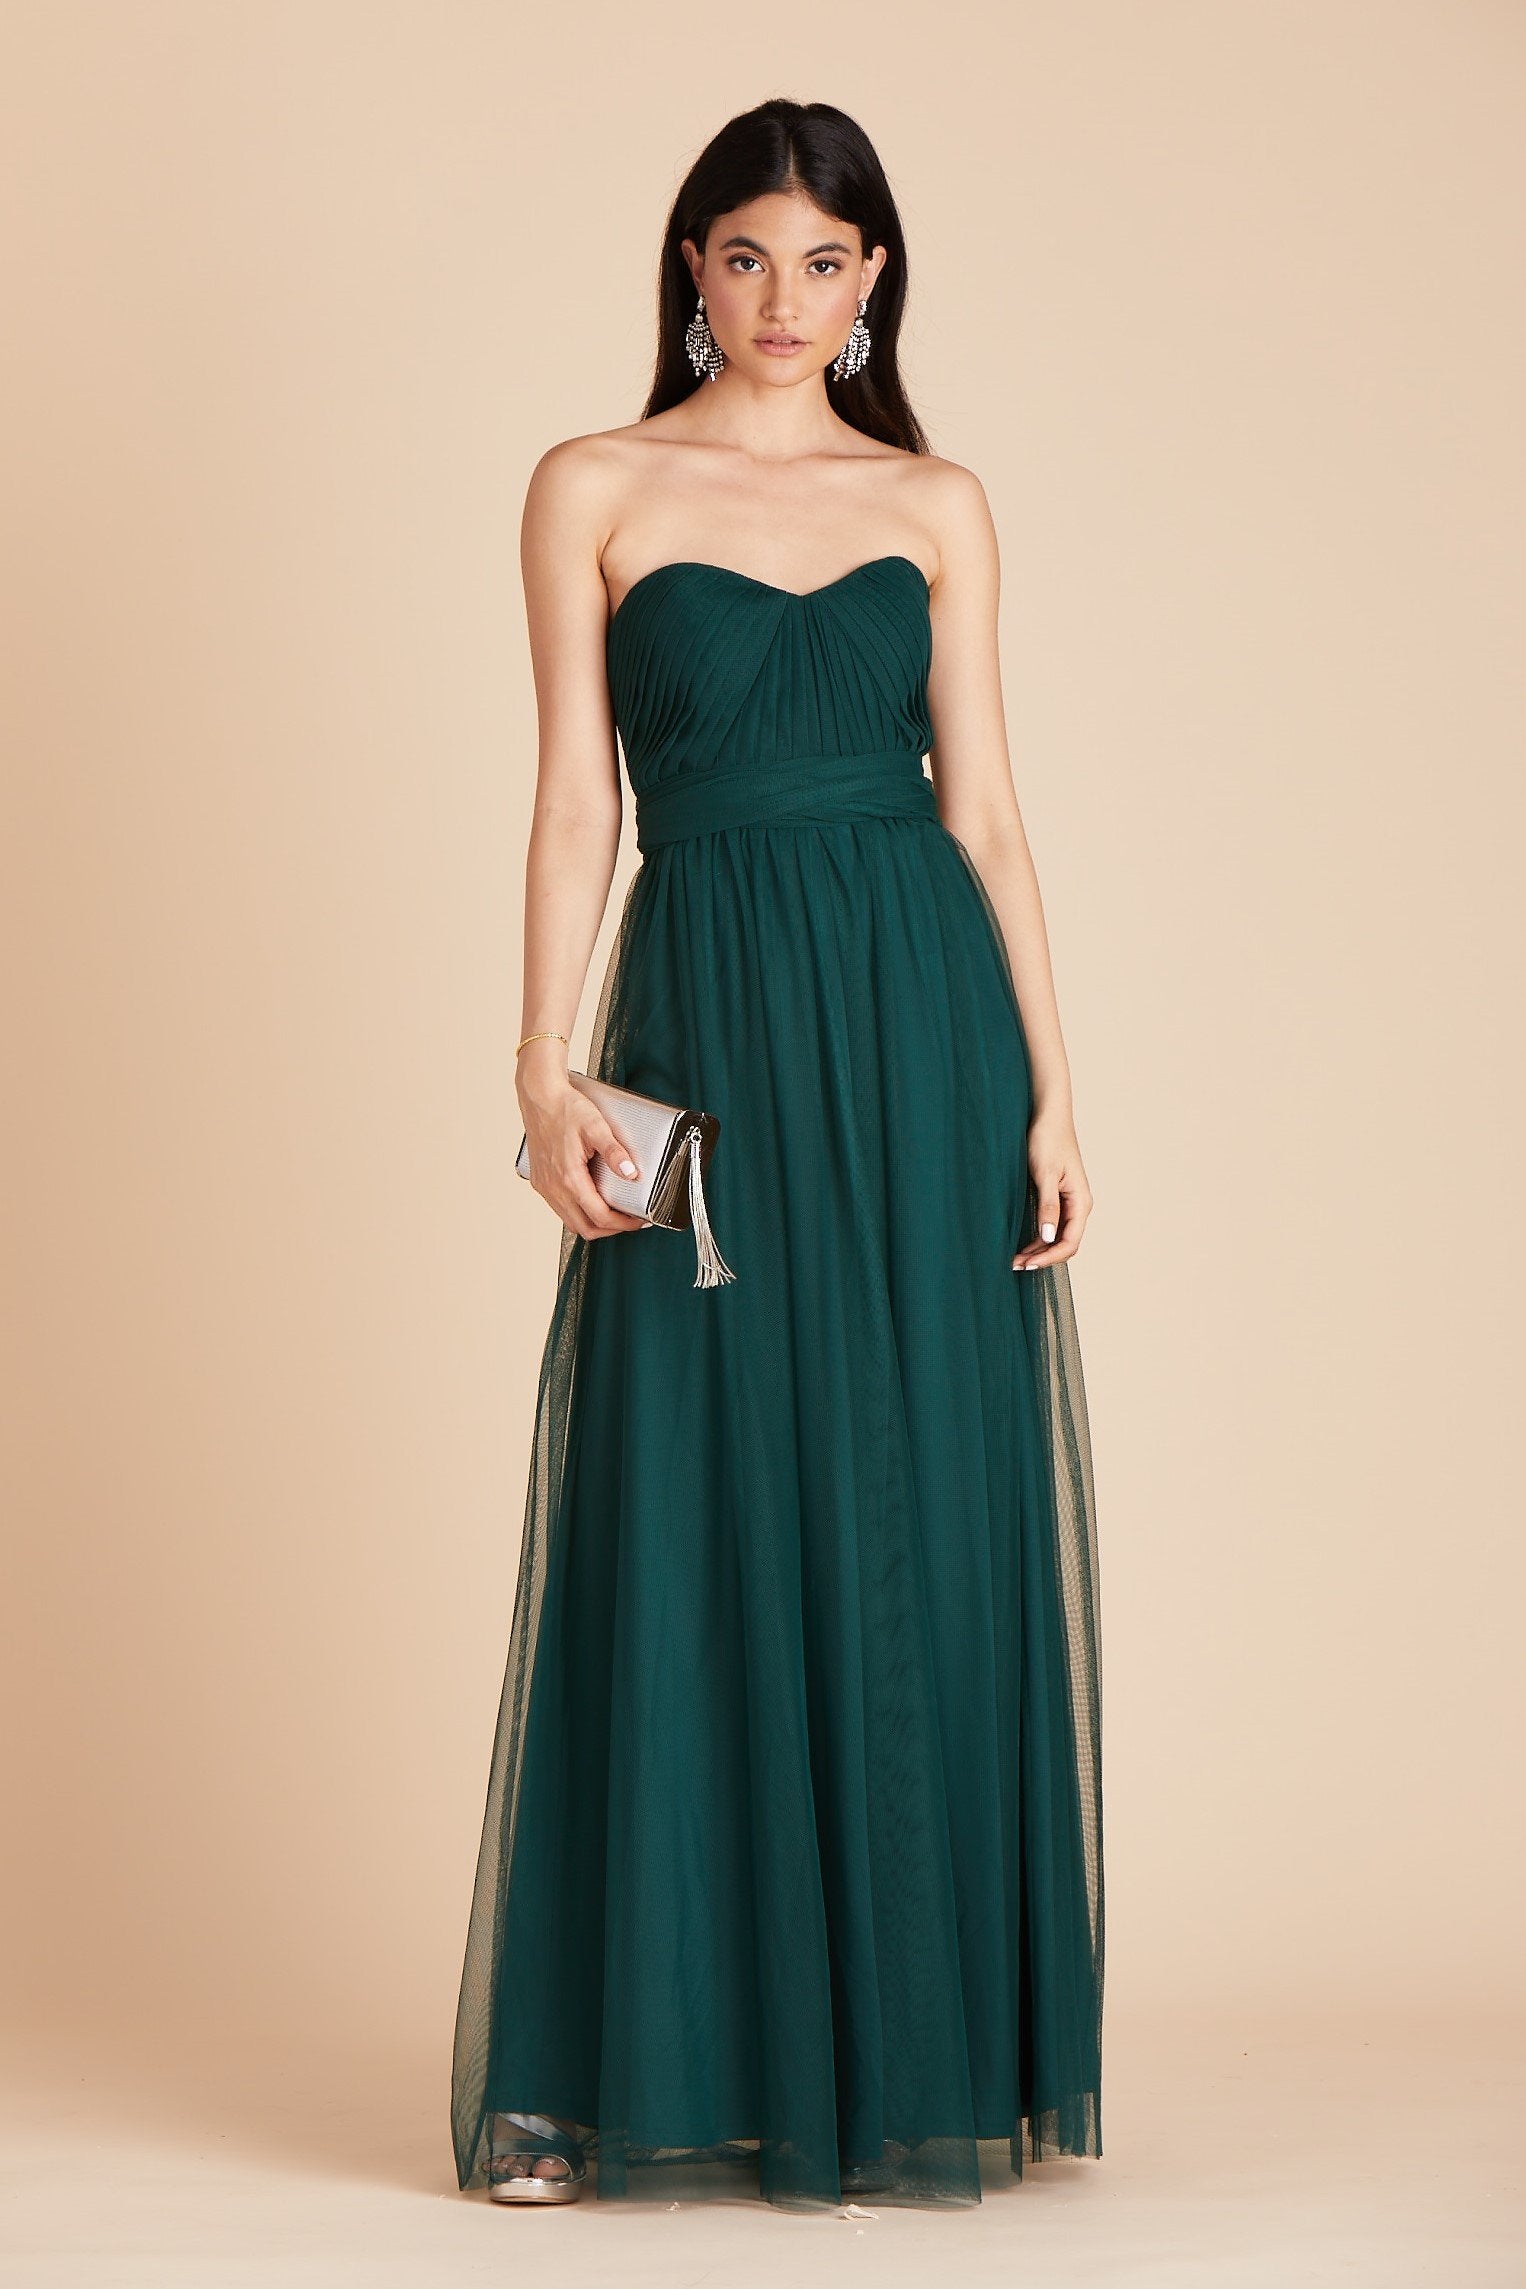 Christina convertible bridesmaid dress in emerald green tulle by Birdy Grey, front view